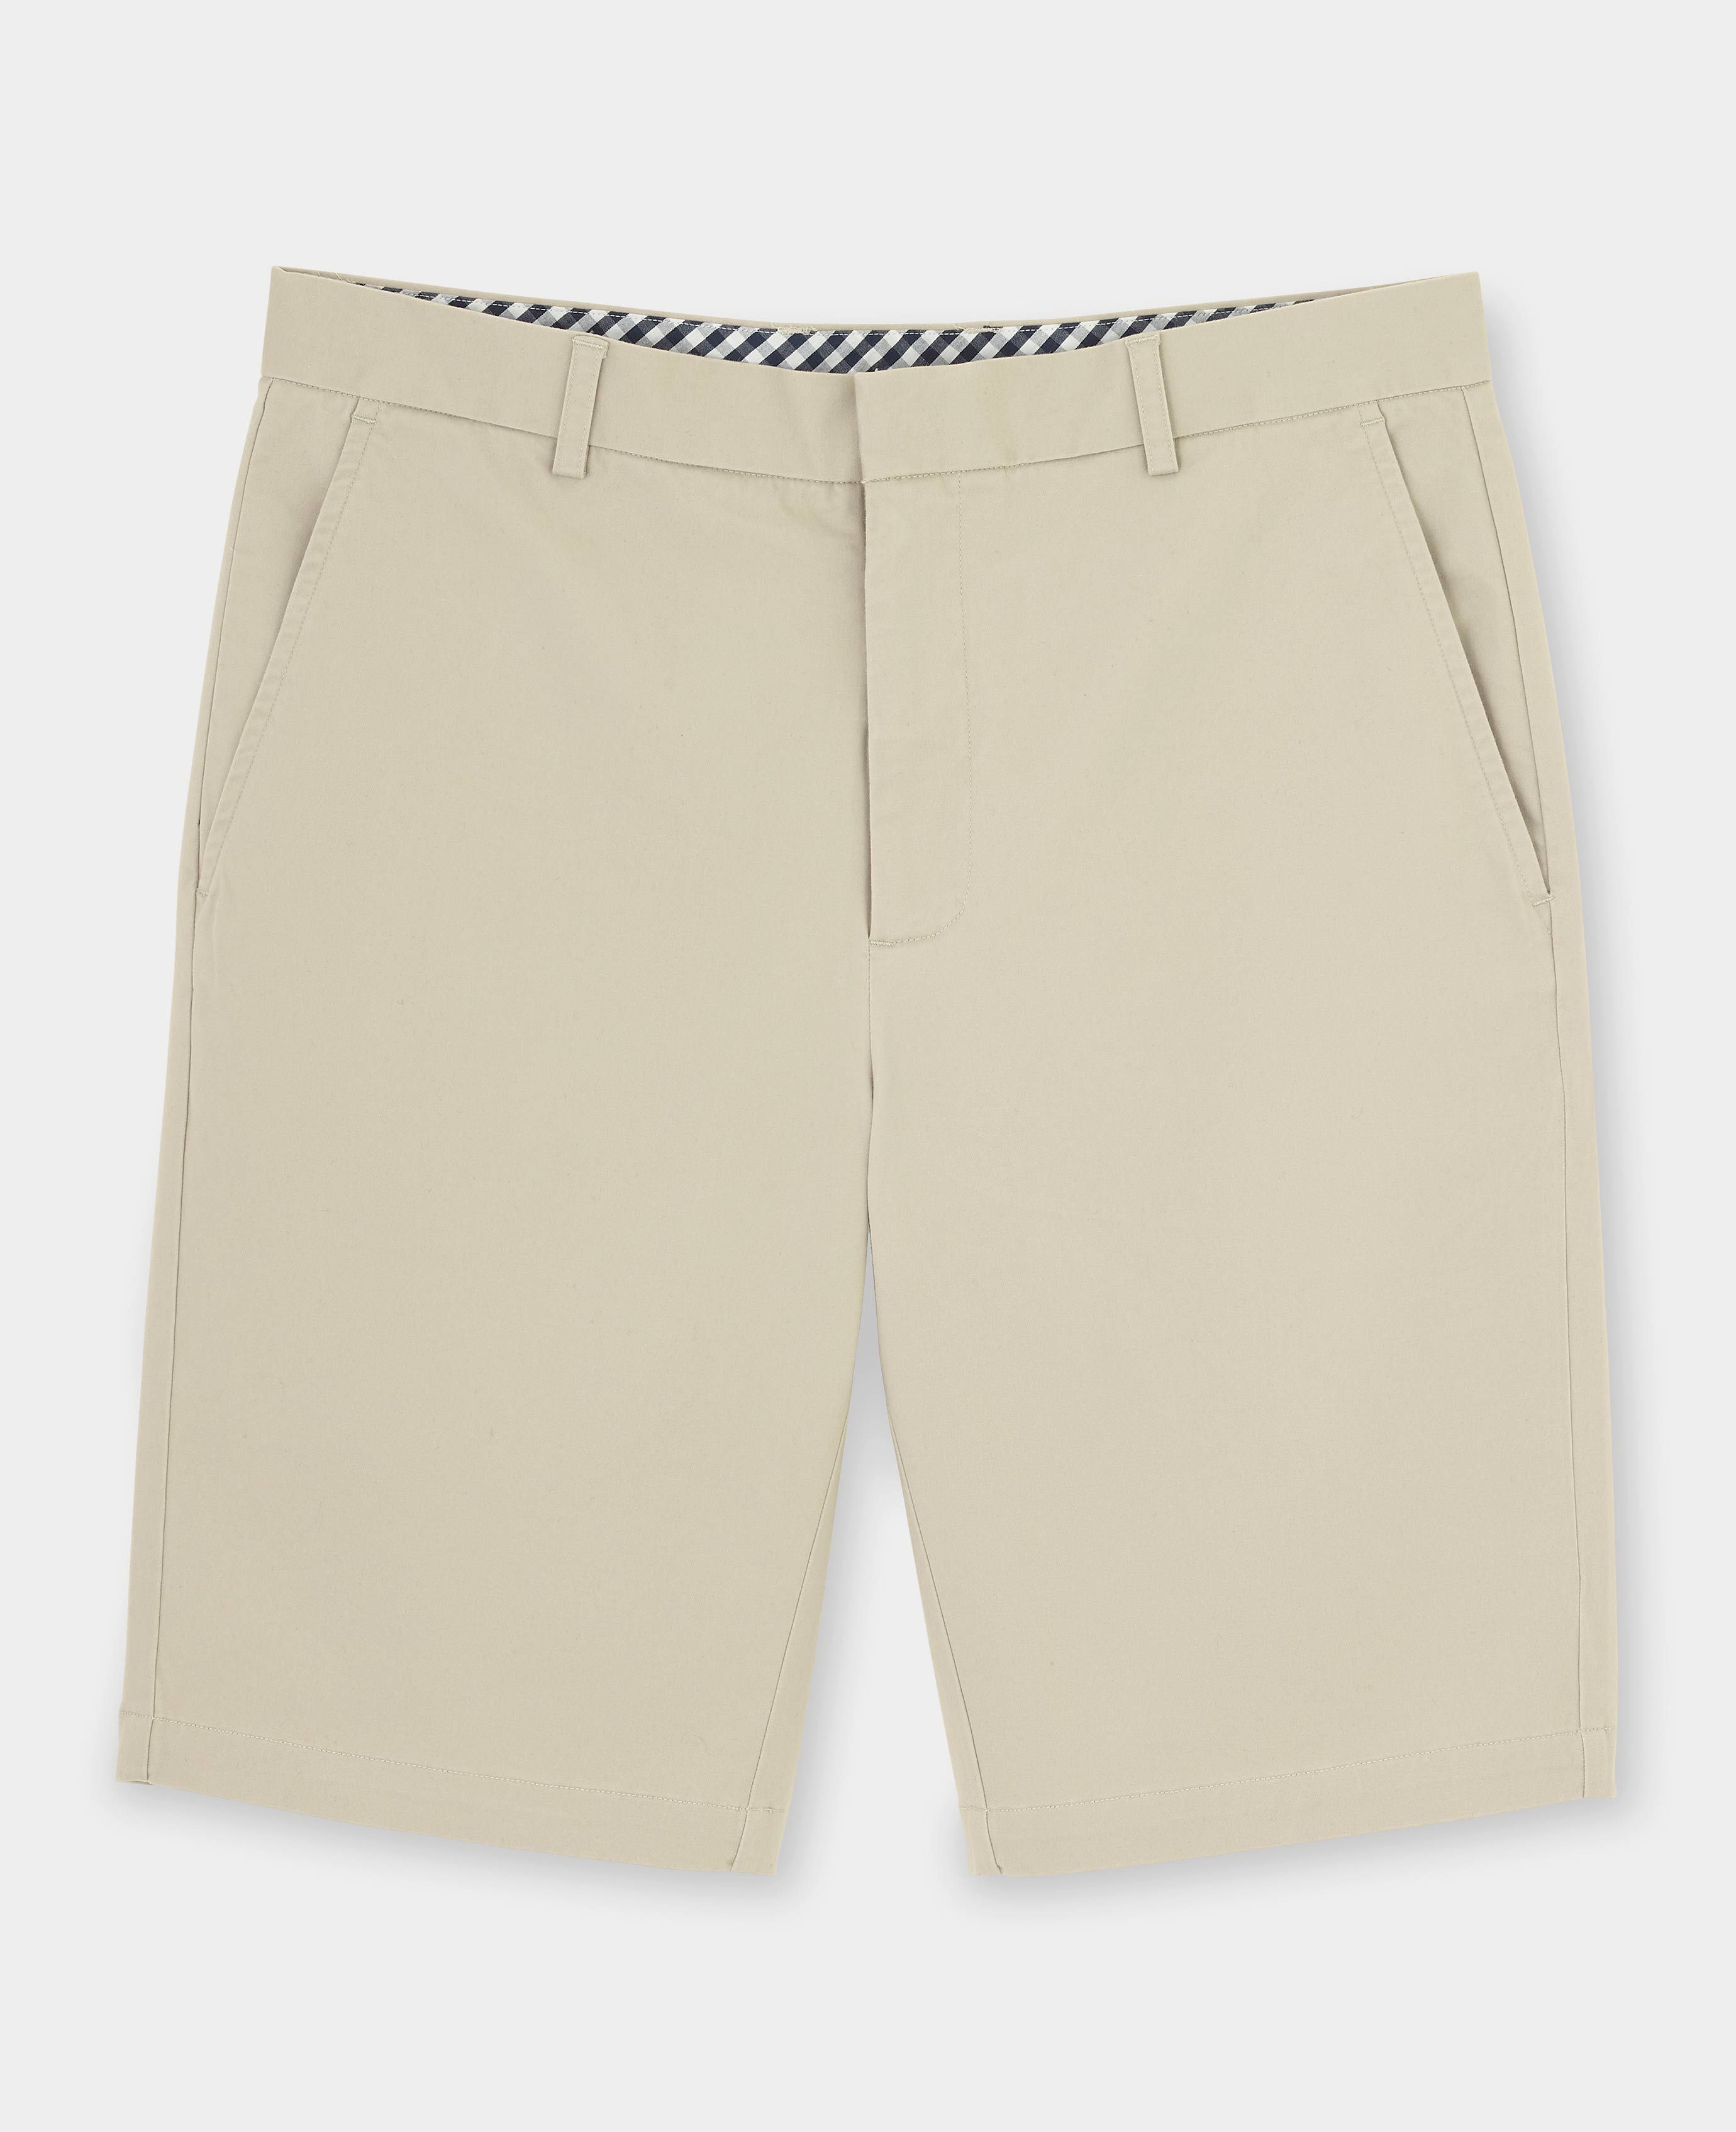 Men's Stretch Cotton Chino Shorts in Beige | Savile Row Co